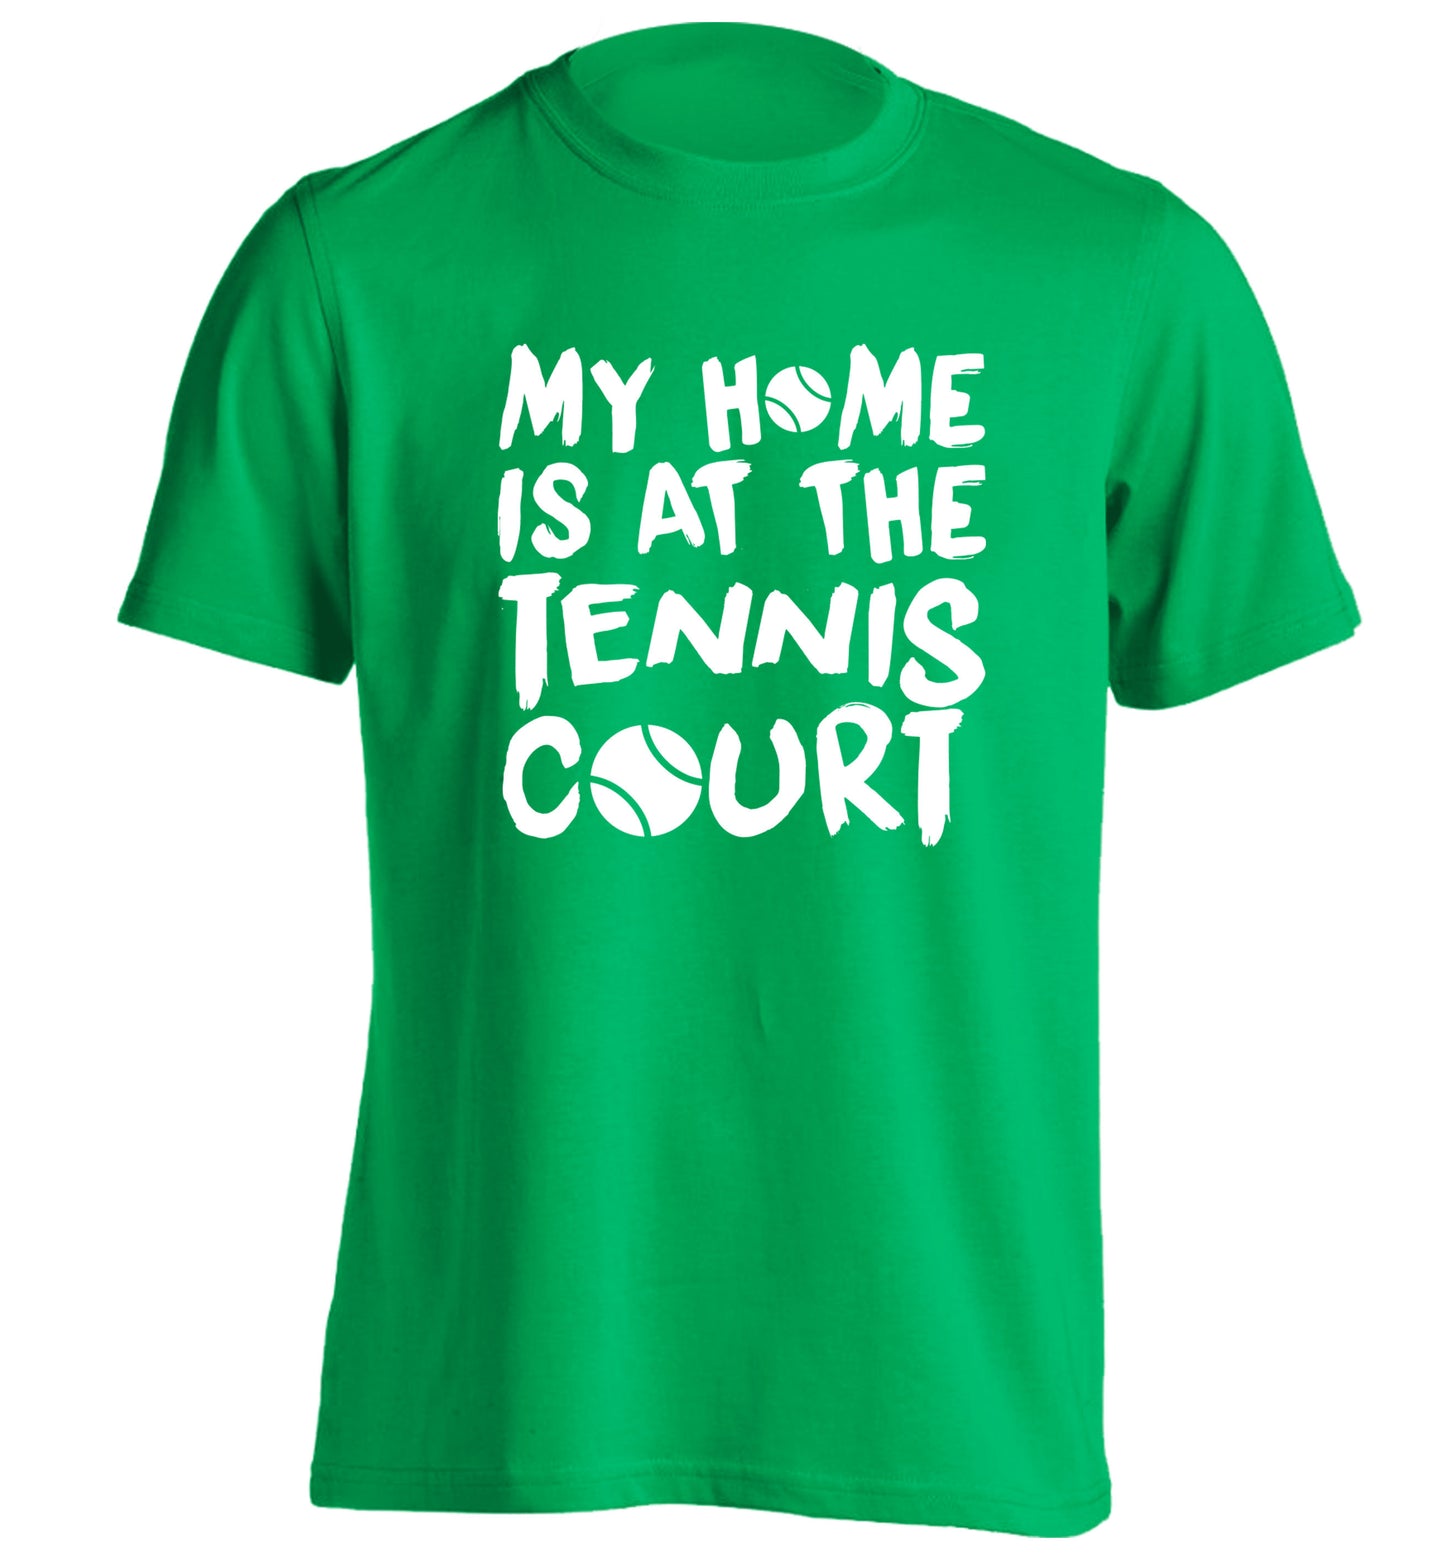 My home is at the tennis court adults unisex green Tshirt 2XL